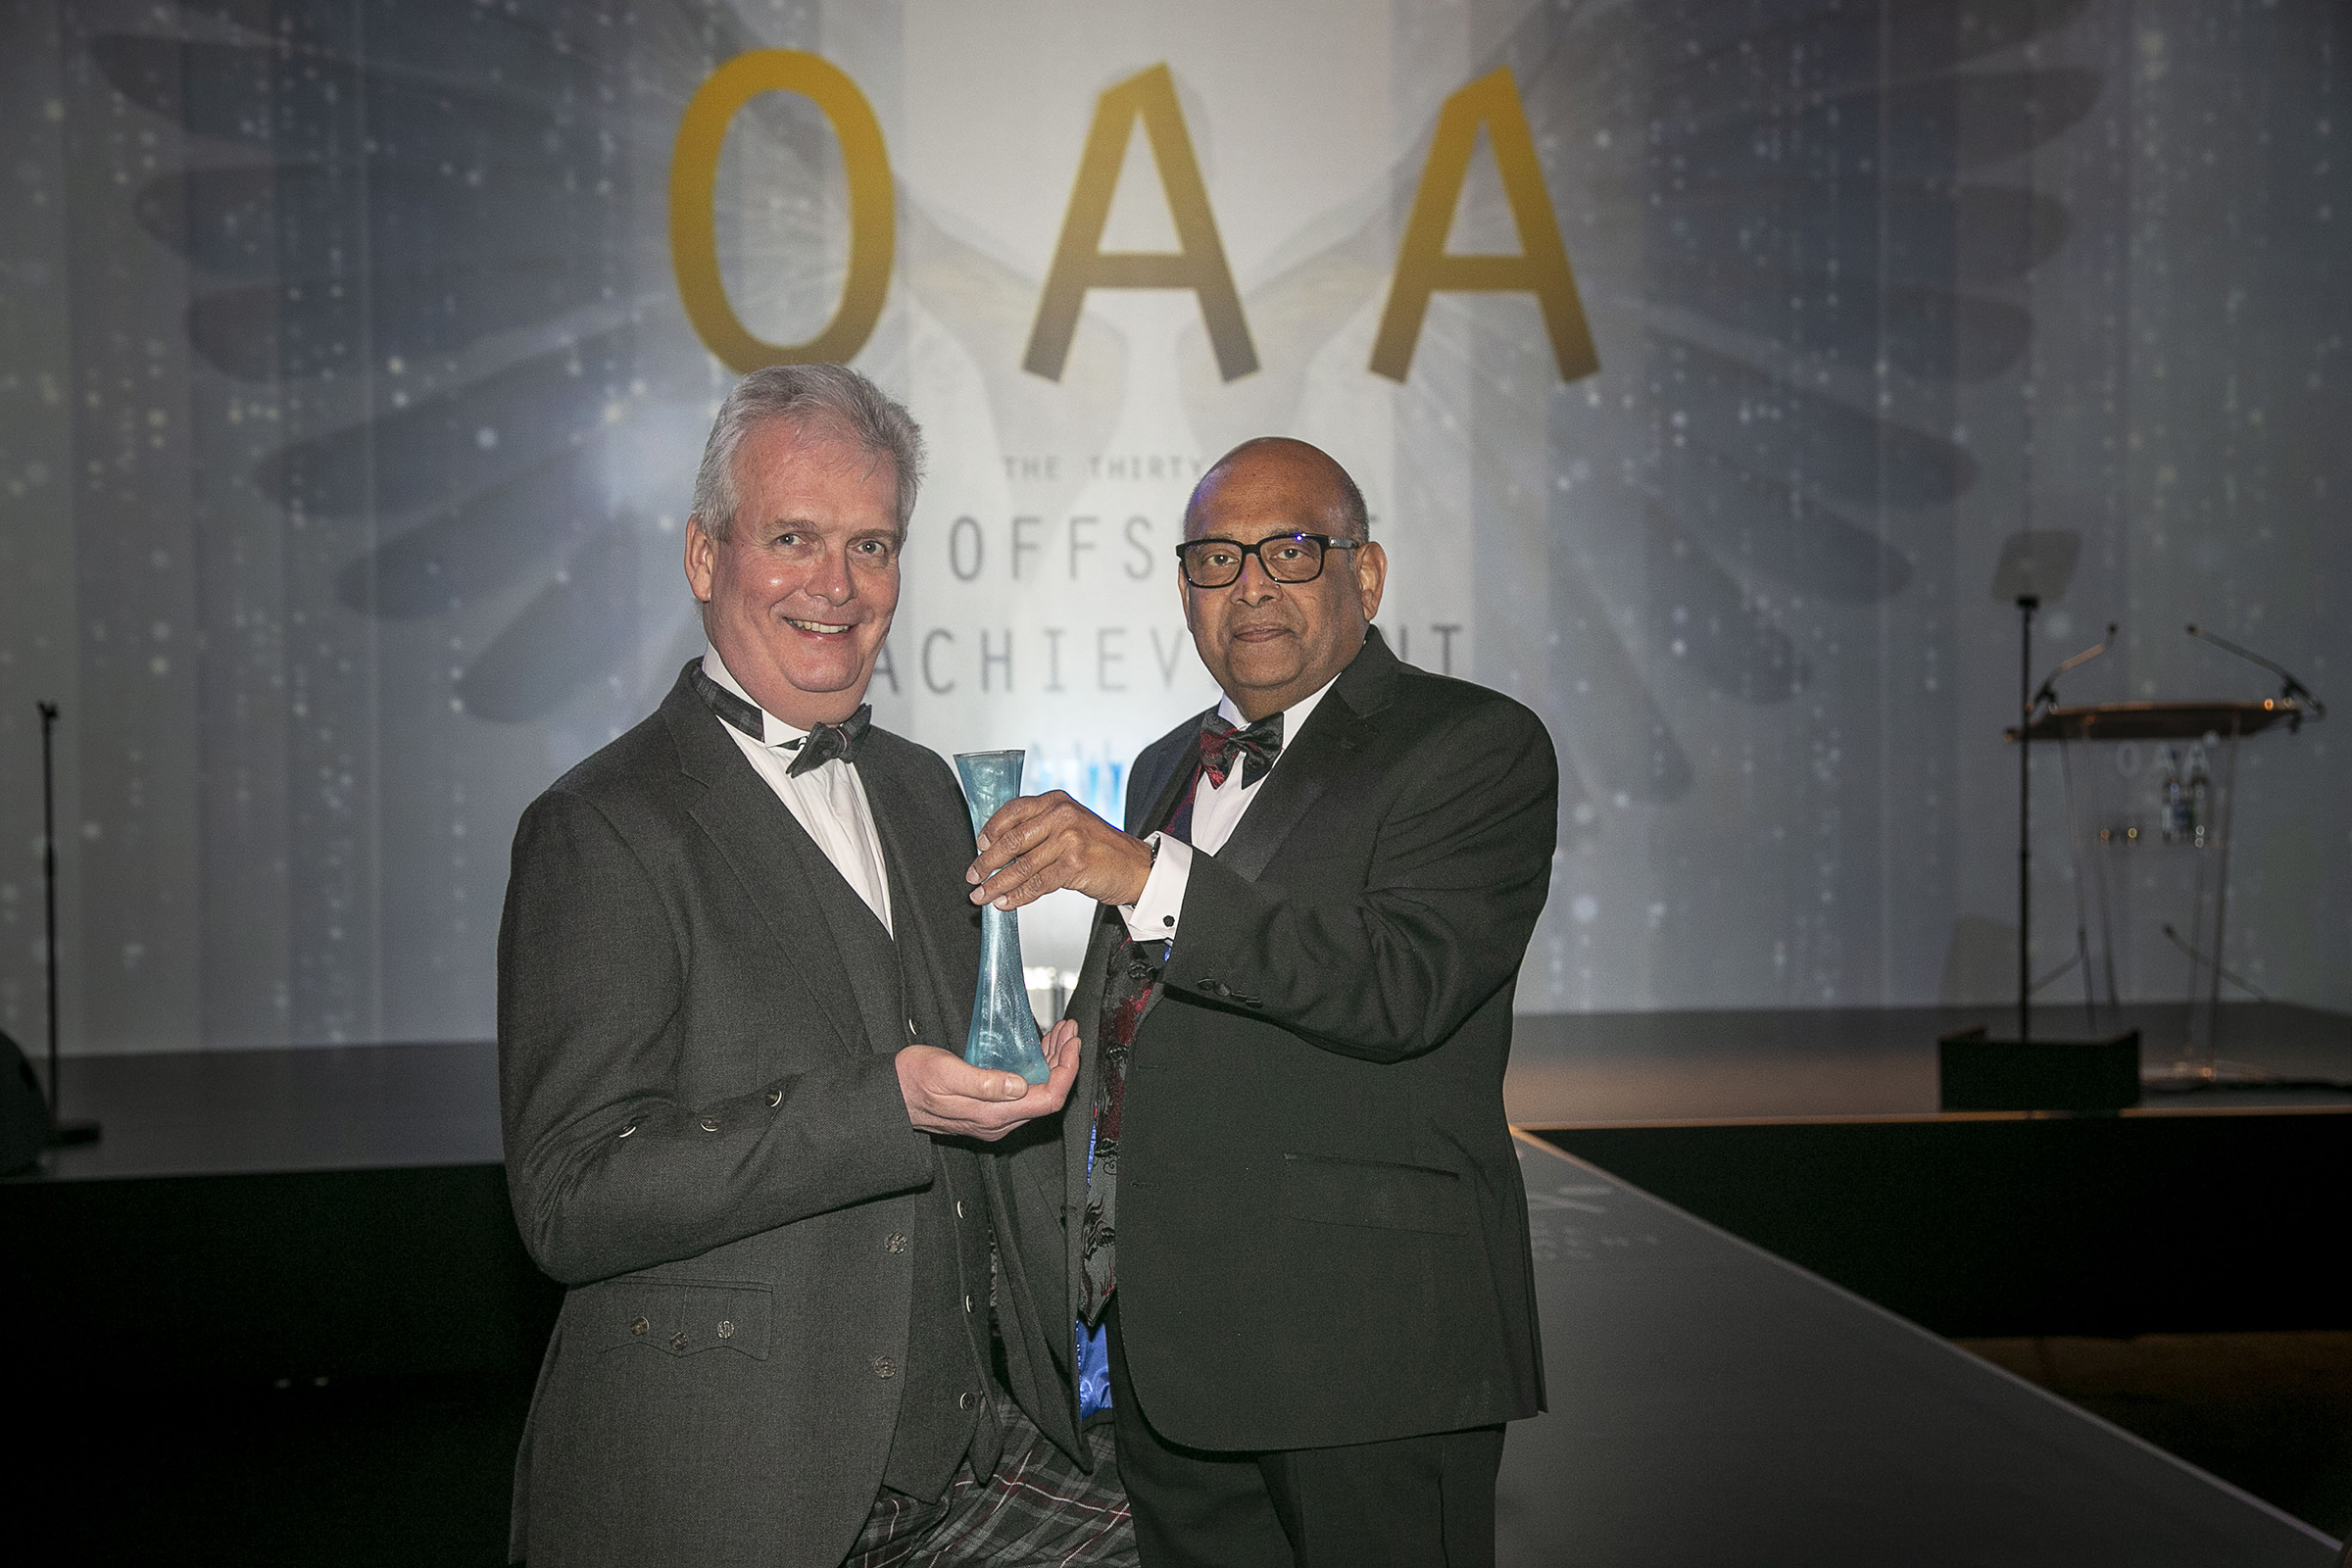 SPE Aberdeen chairman Ian Phillips, left, presents the significant contribution award to Denis Pinto at the 2019 Offshore Achievement Awards